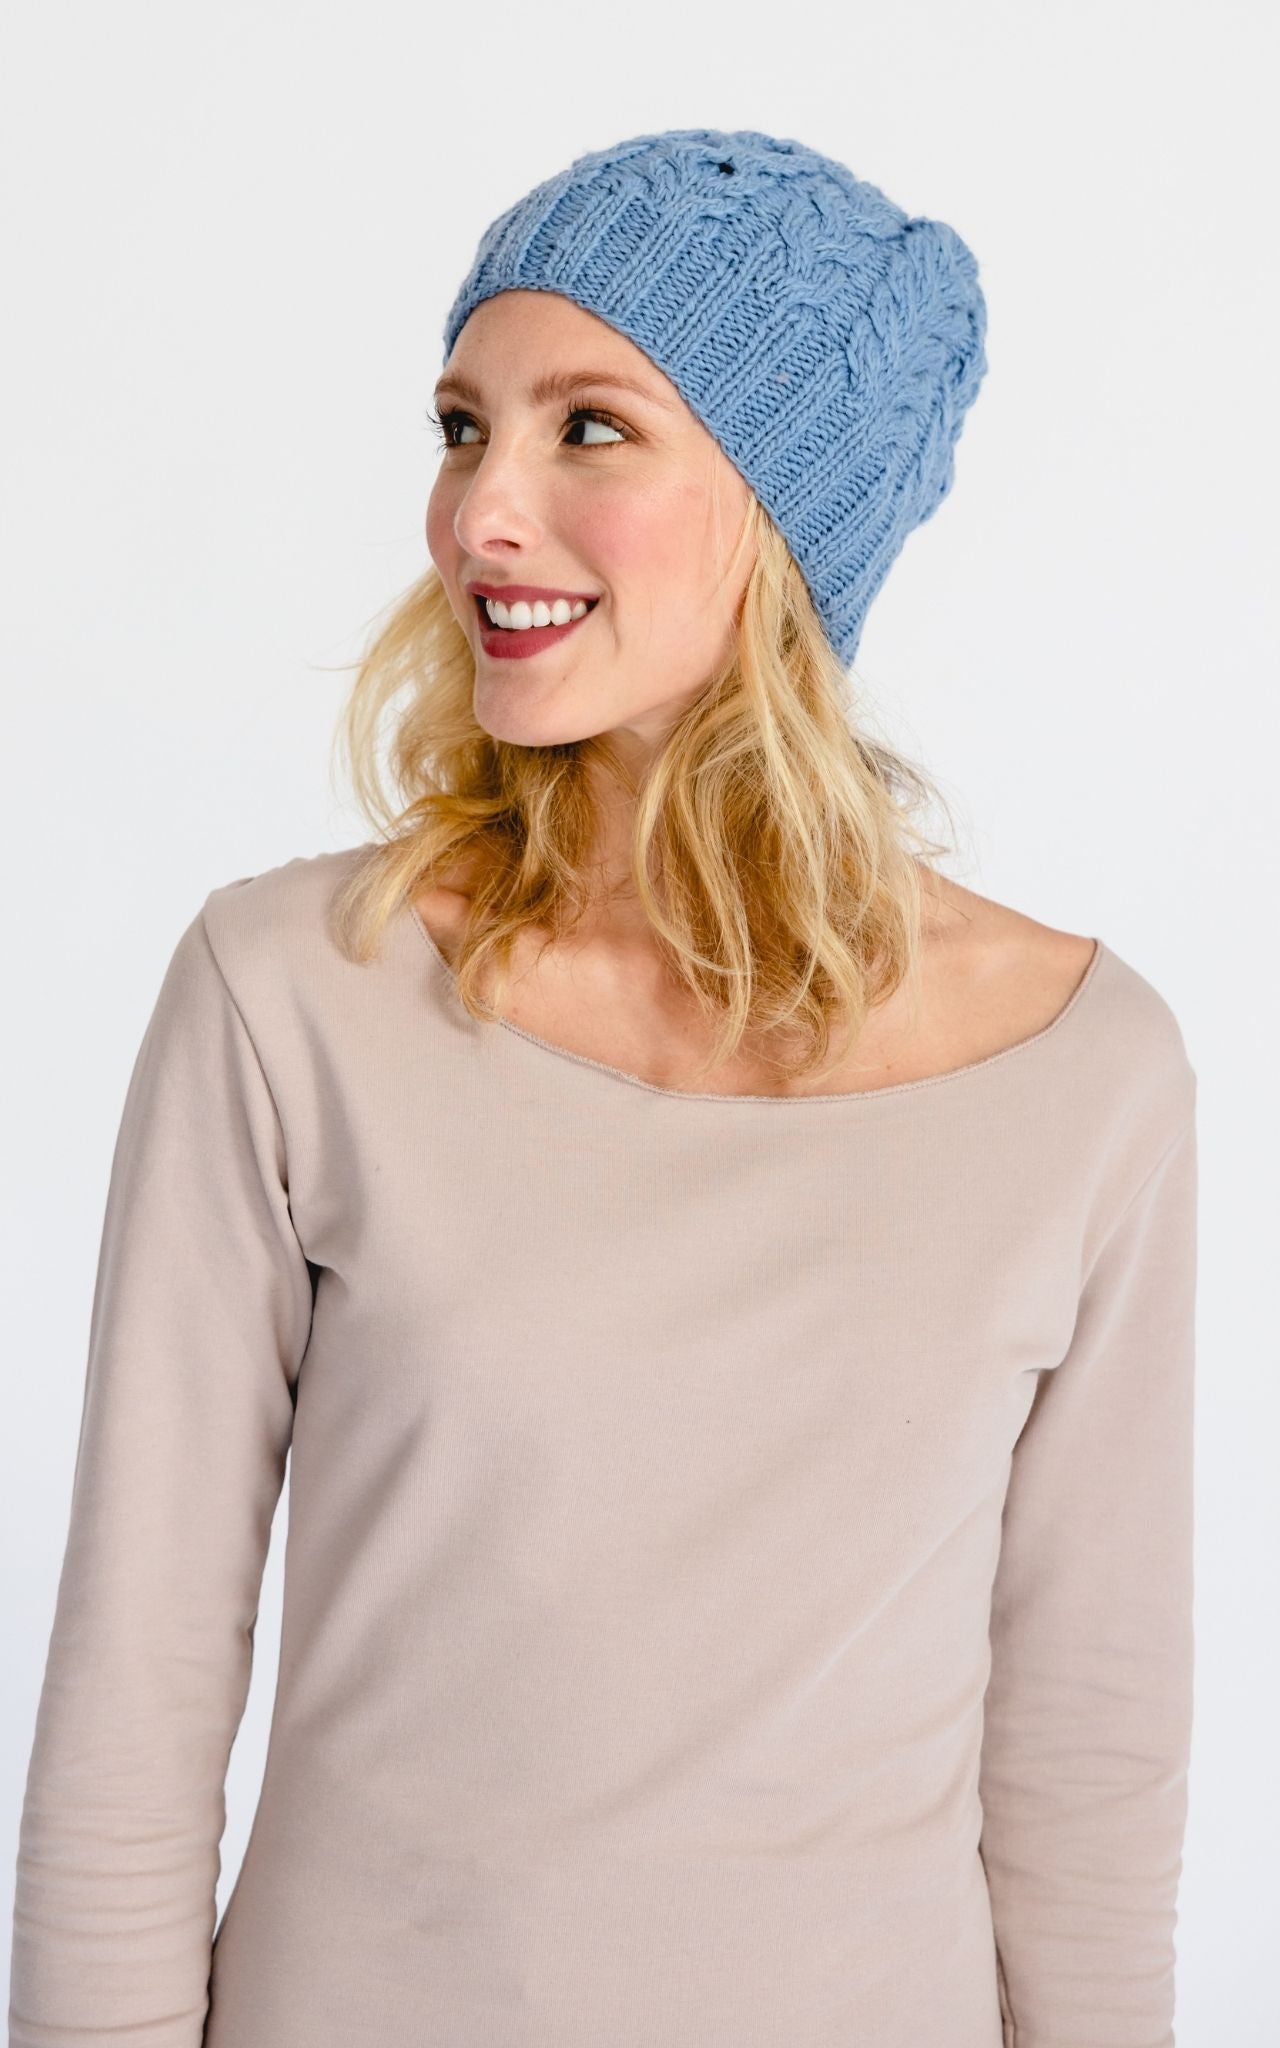 Surya Australia Ethical Cable Knit Merino Wool Beanie from Nepal - Light Blue